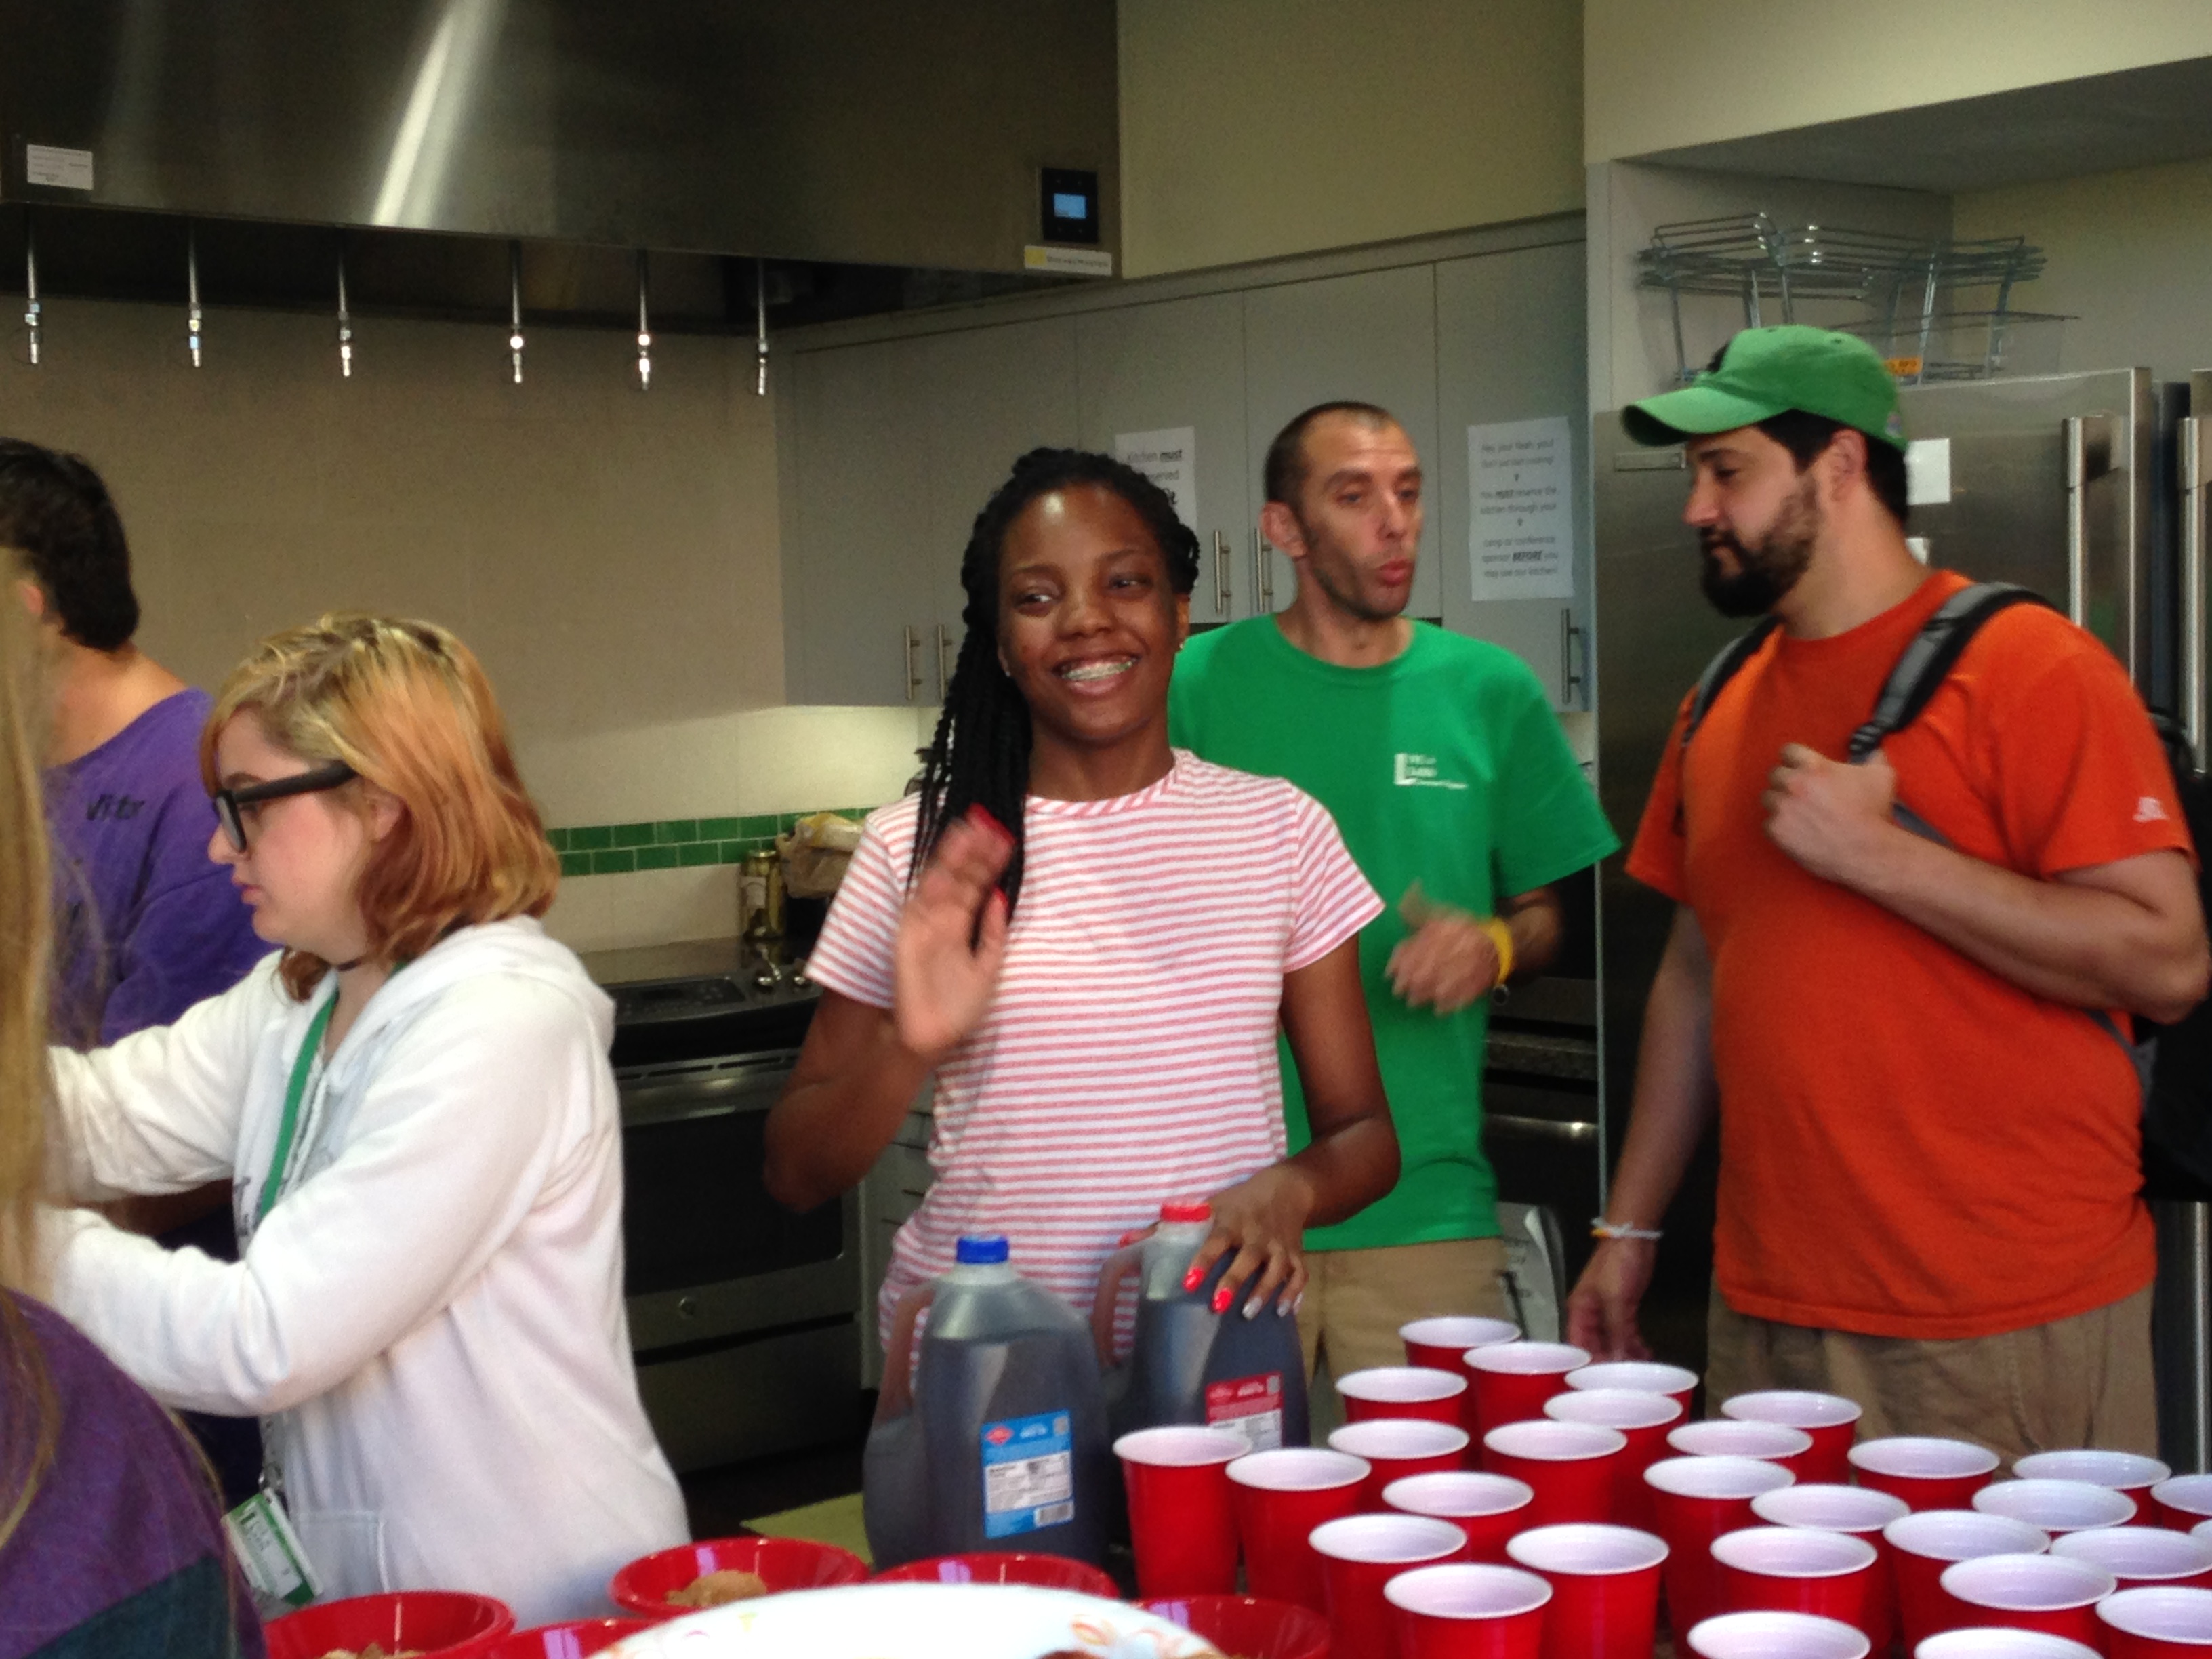 Participant waving and smiling, while filling up red cups. 